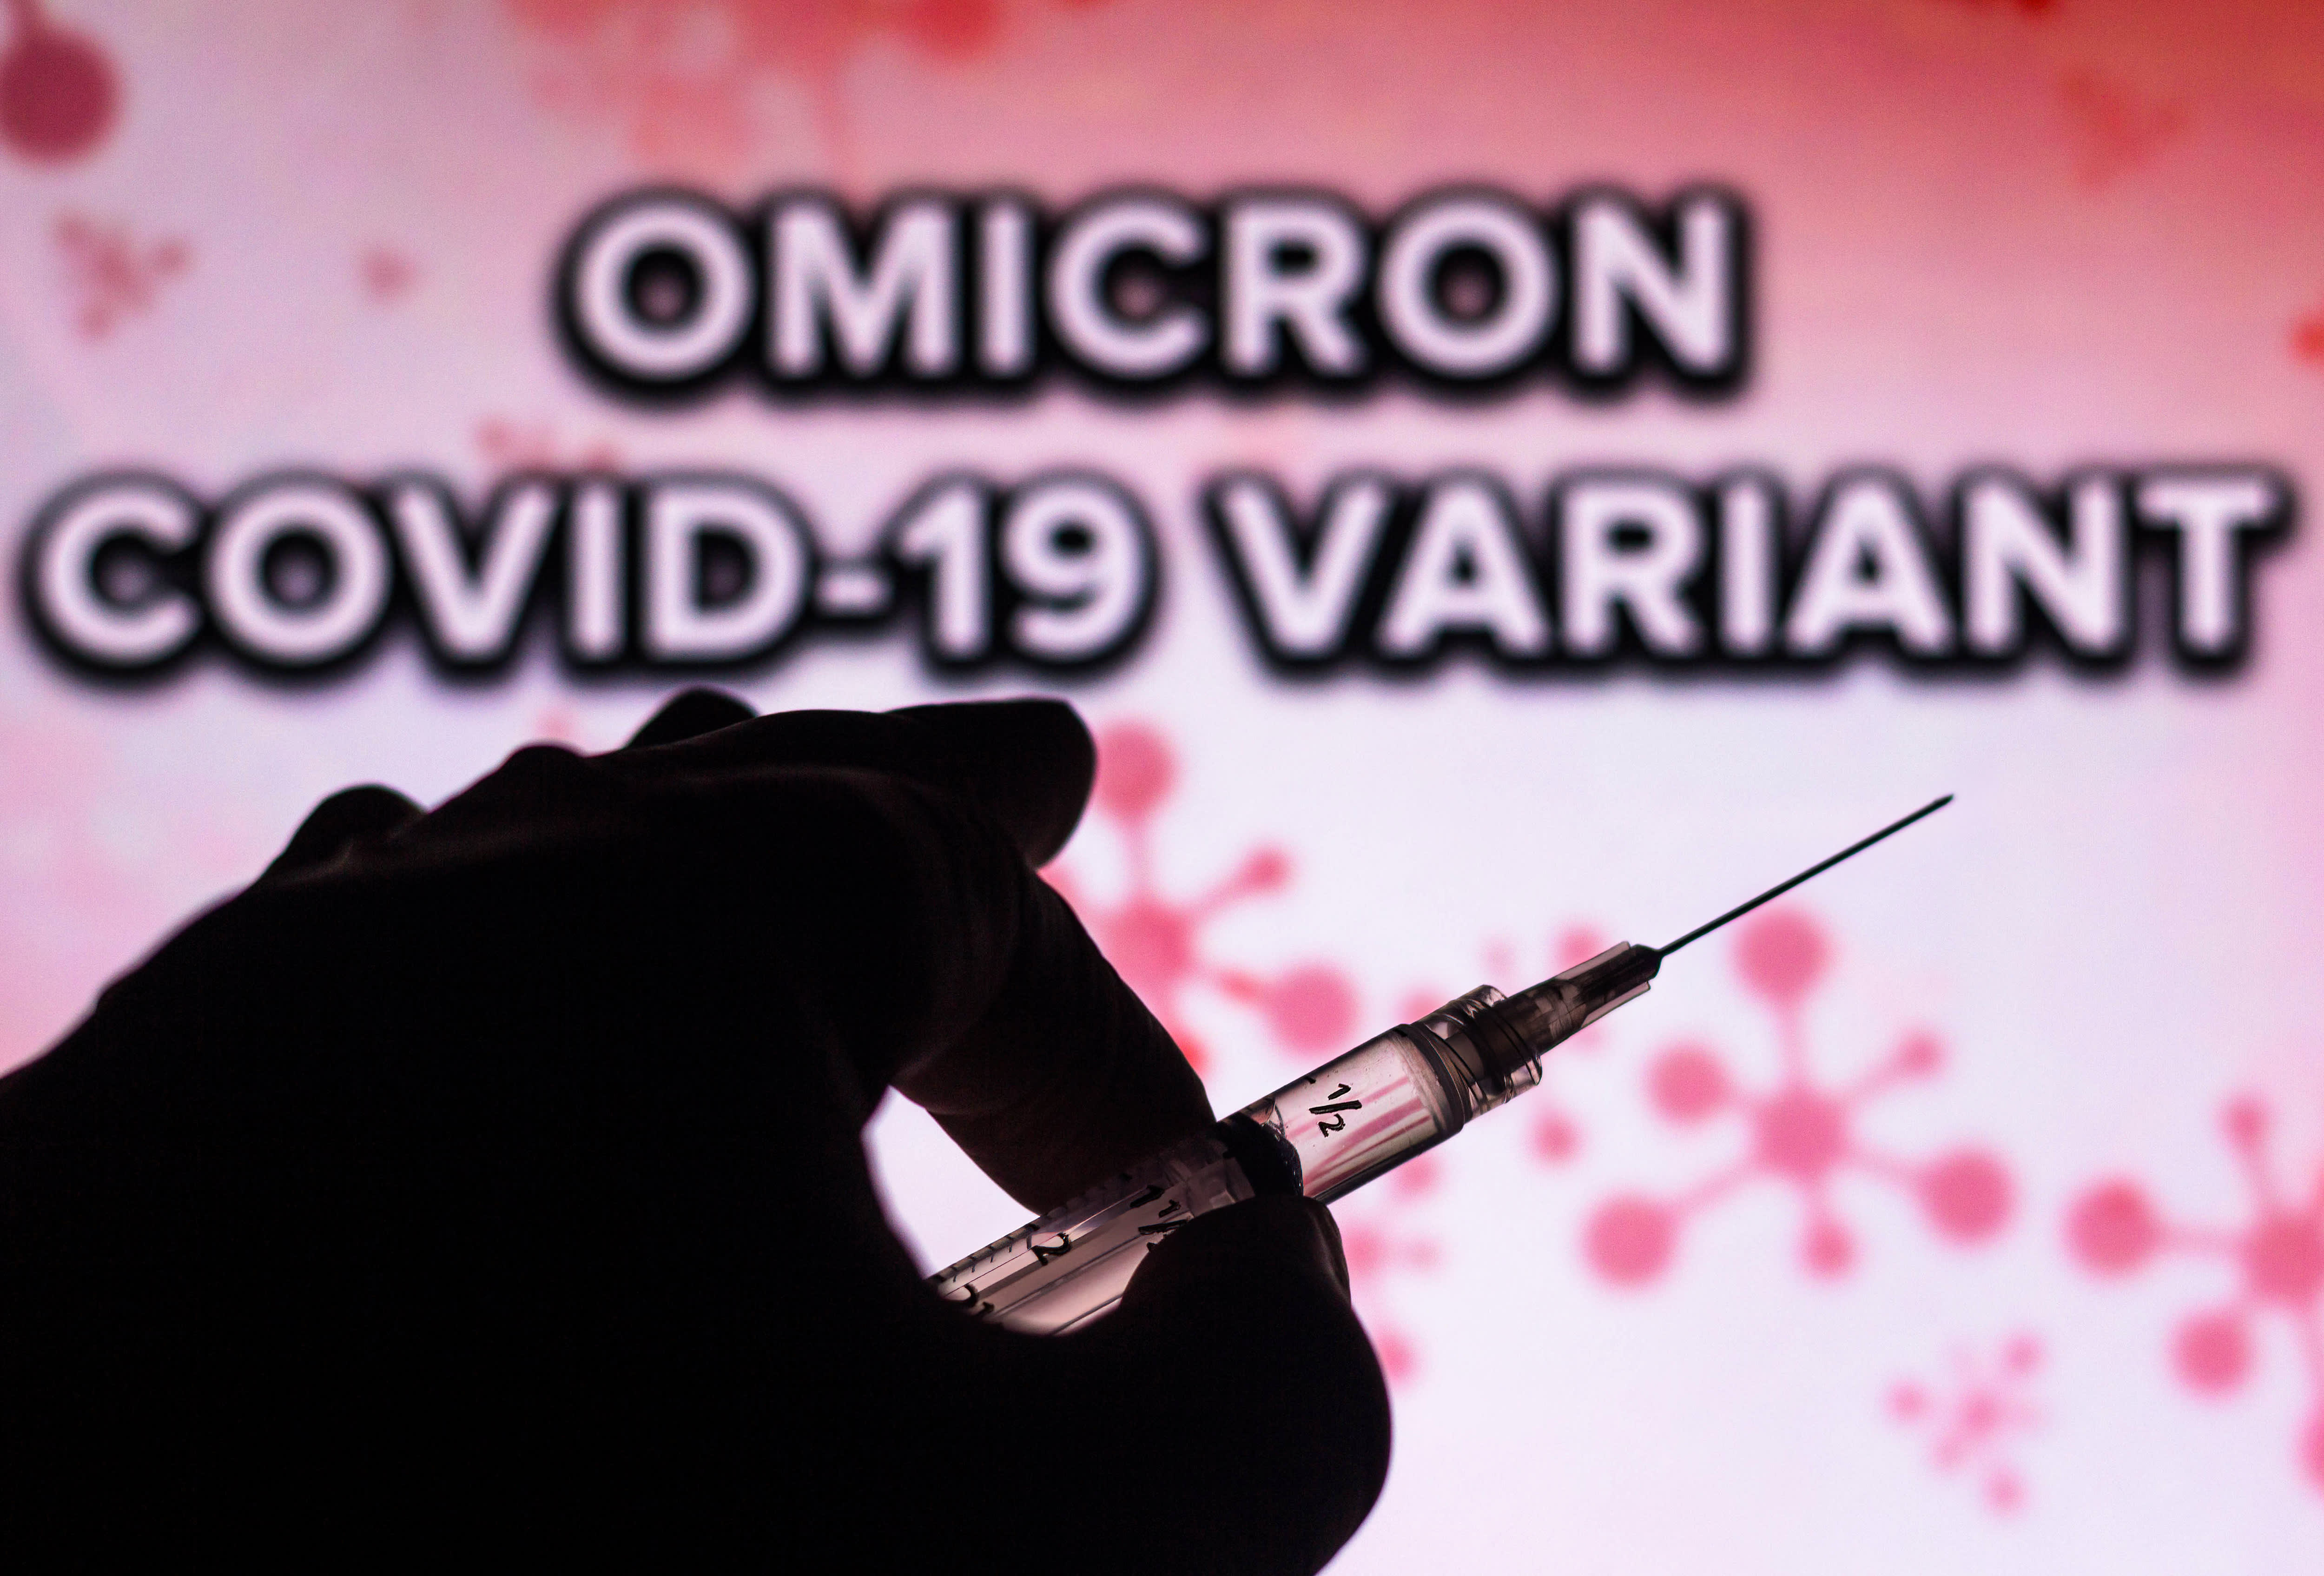 Fauci says omicron Covid variant has already been found in 20 countries, but not yet in the U.S.